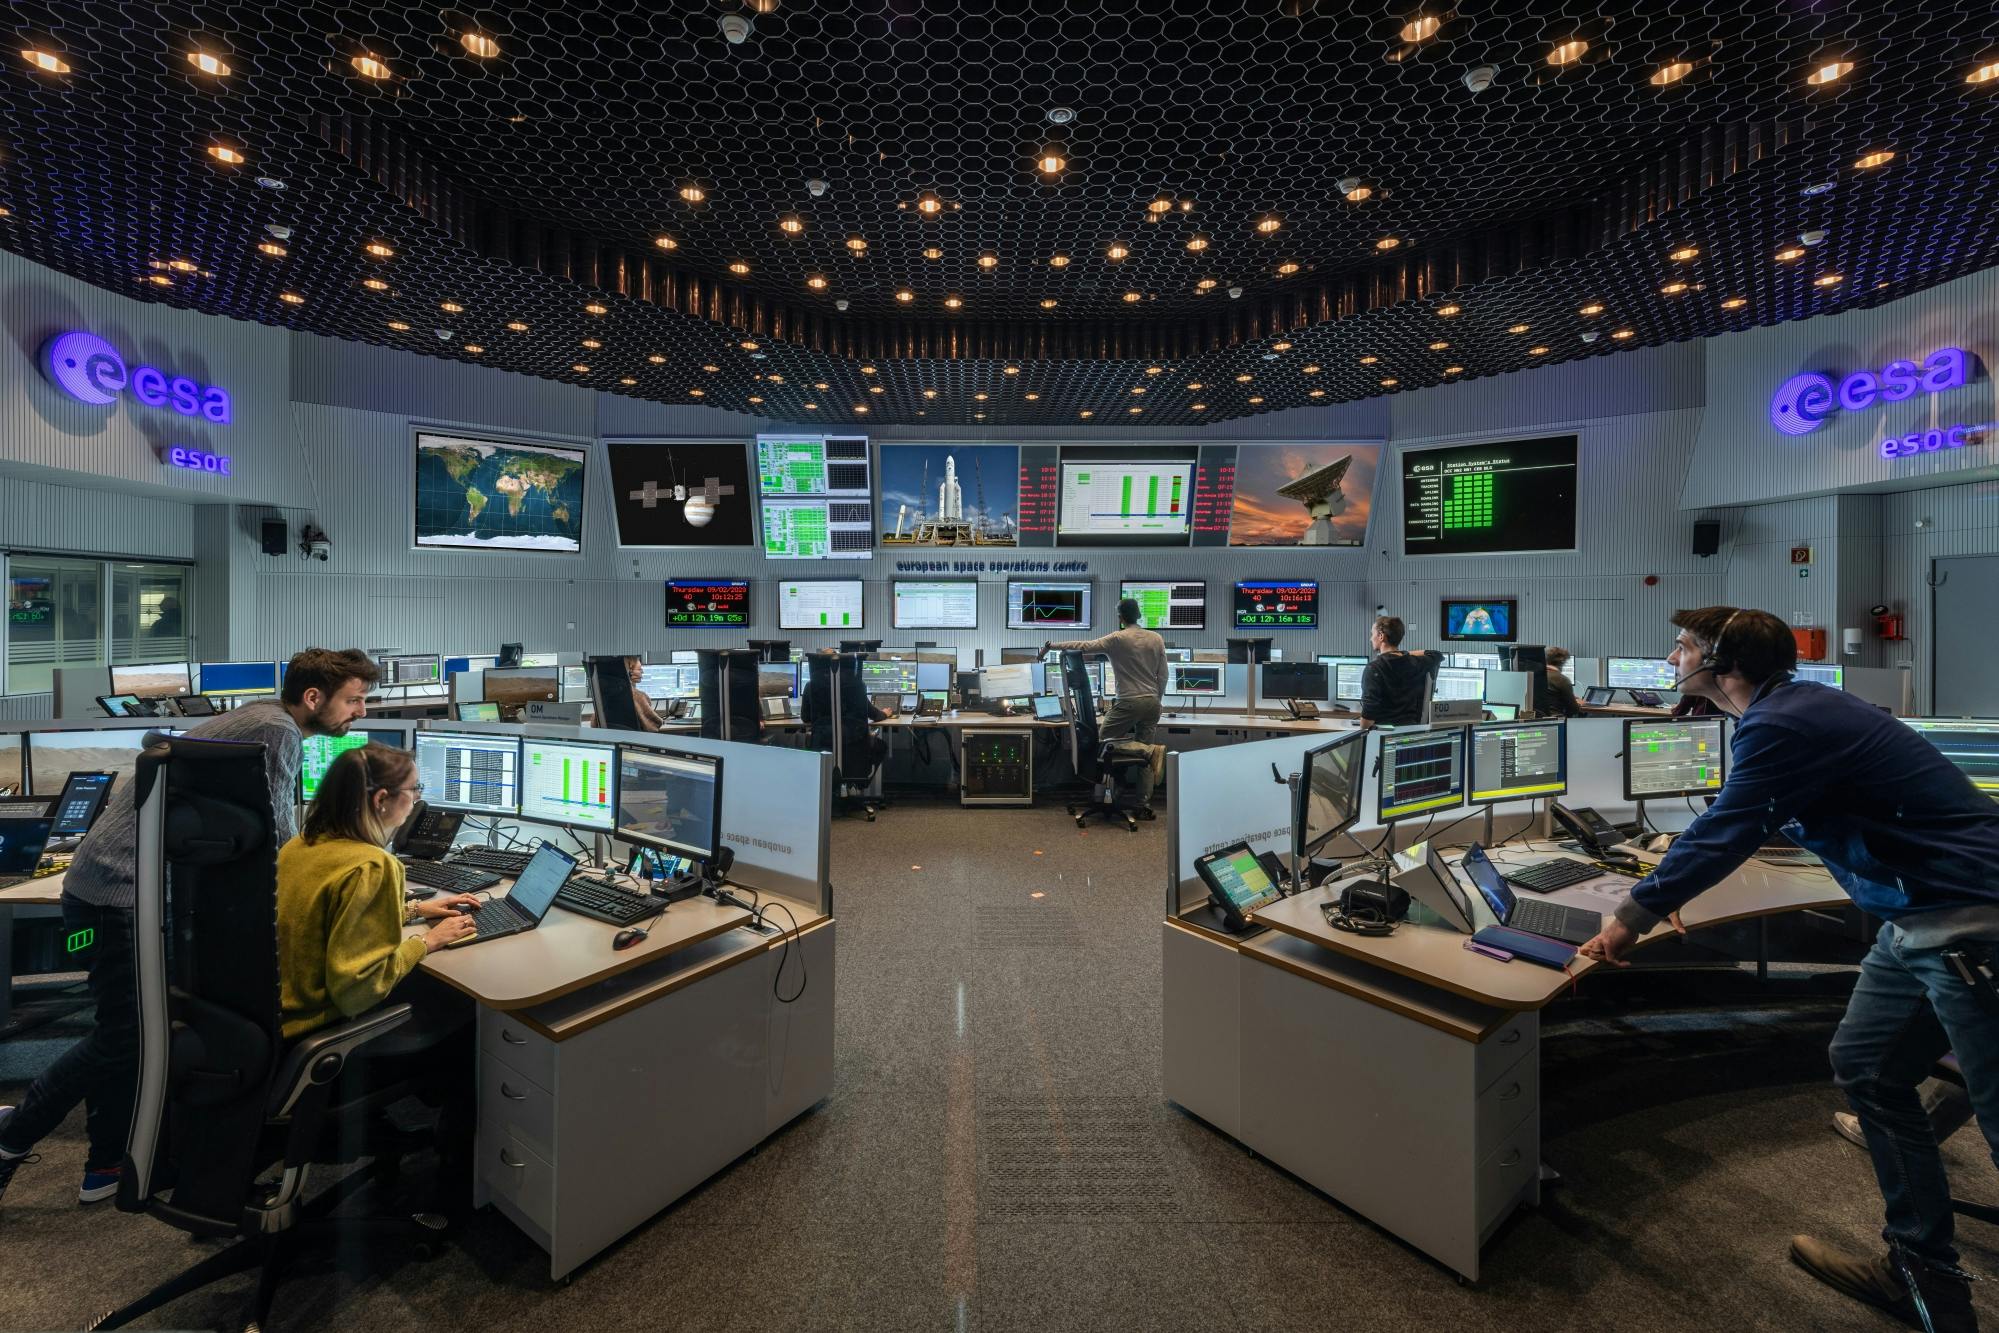 Guided Visit of the European Space Agency in Darmstadt